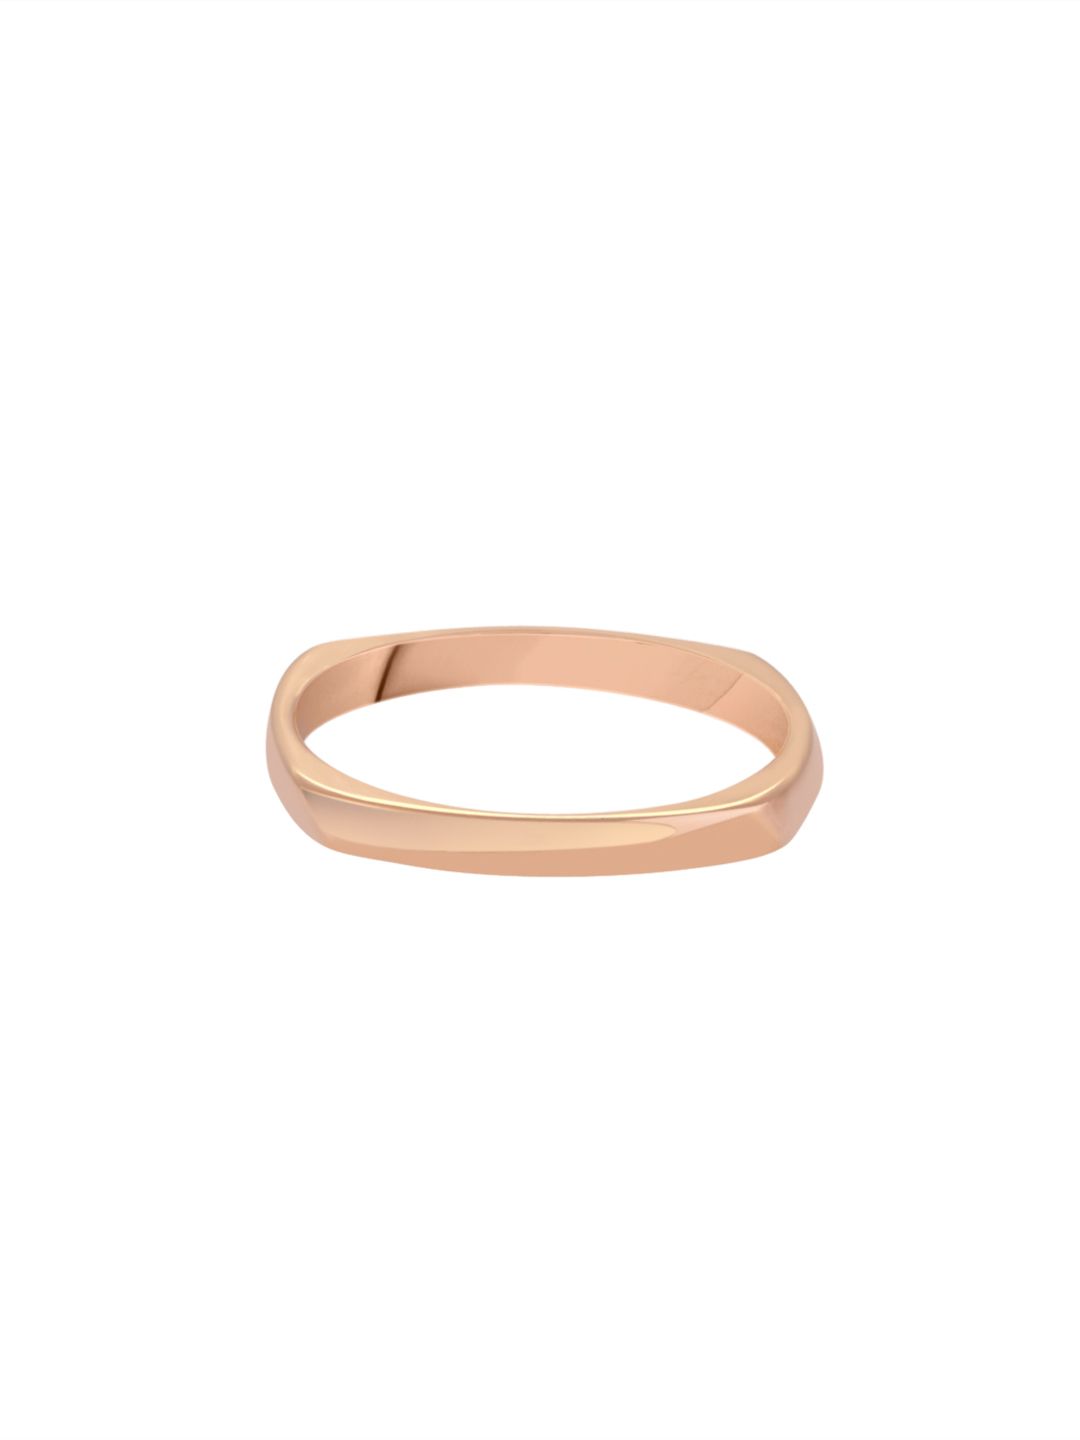 TALISMAN Rose-Gold Plated Handcrafted Square-Shaped Finger Ring Price in India